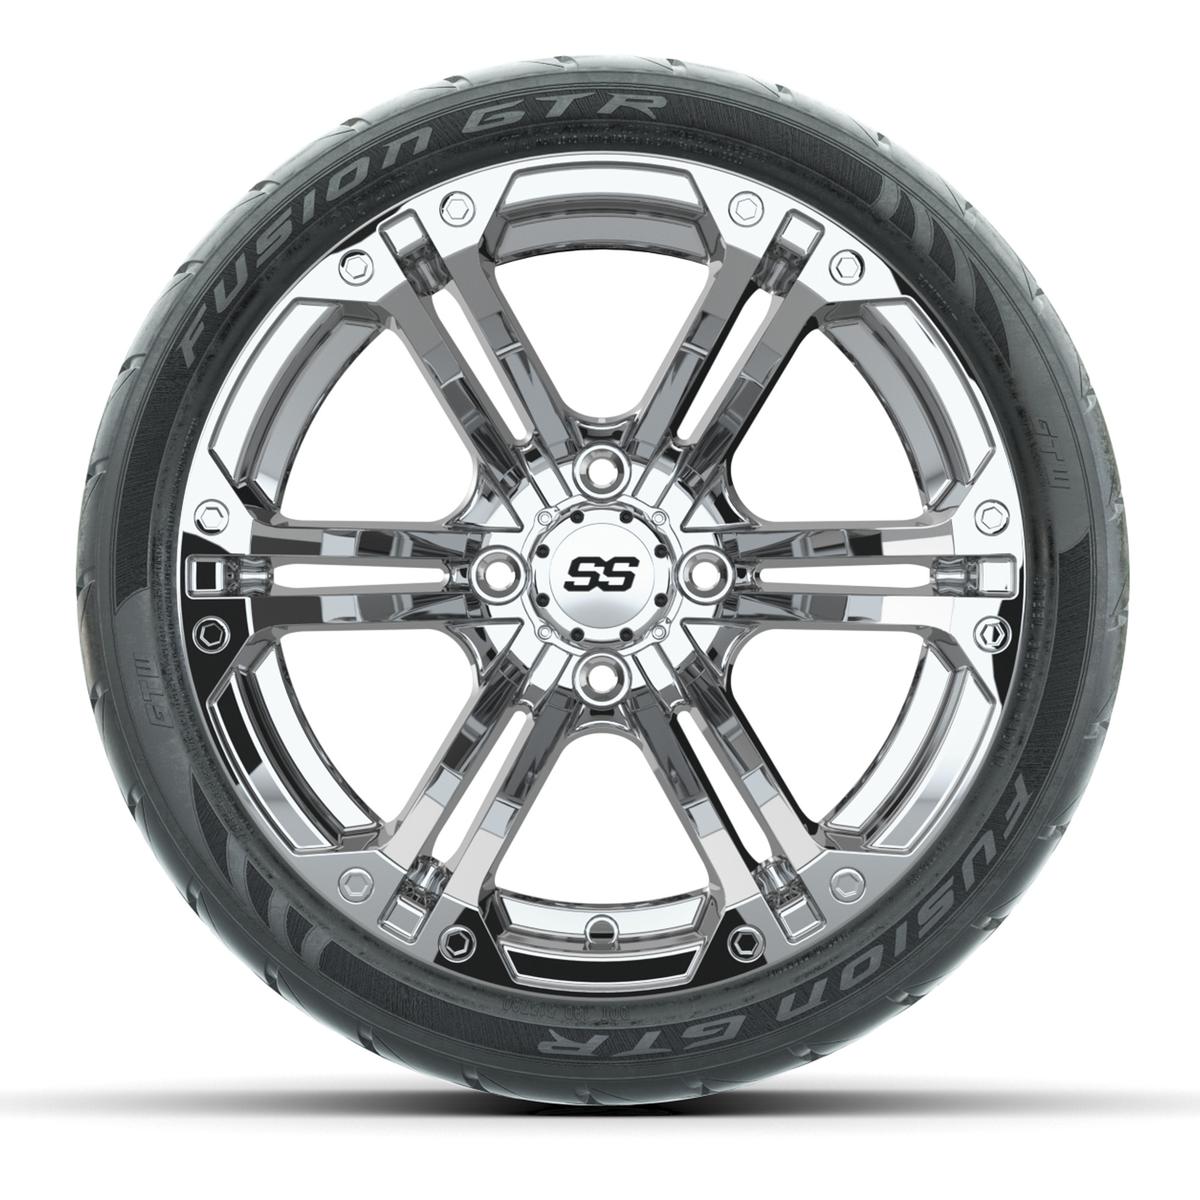 Set of (4) 14 in GTW Specter Wheels with 205/40-R14 Fusion GTR Street Tires